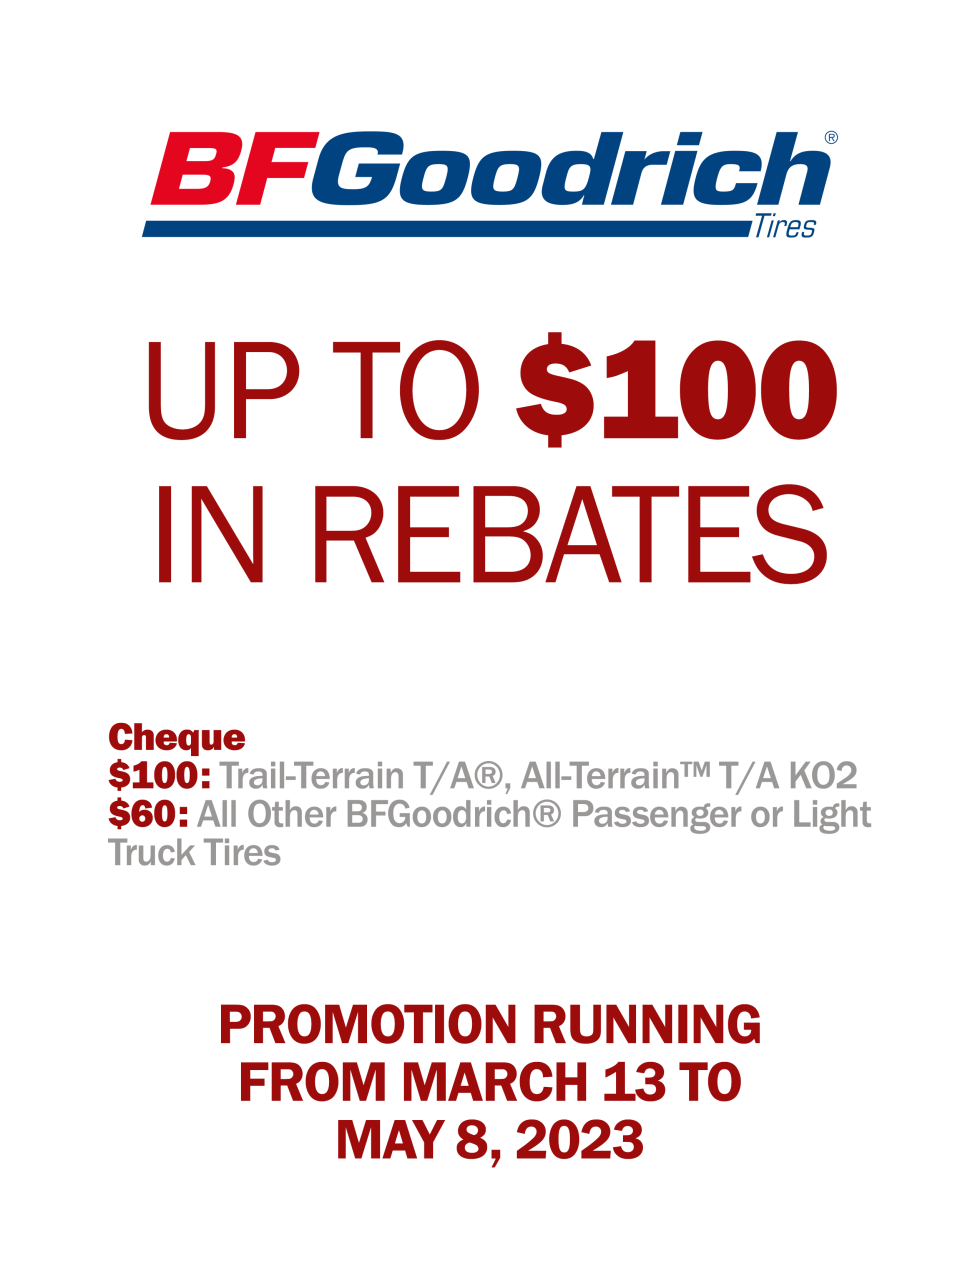 bfgoodrich-tire-rebate-2023-save-big-on-your-next-tire-purchase